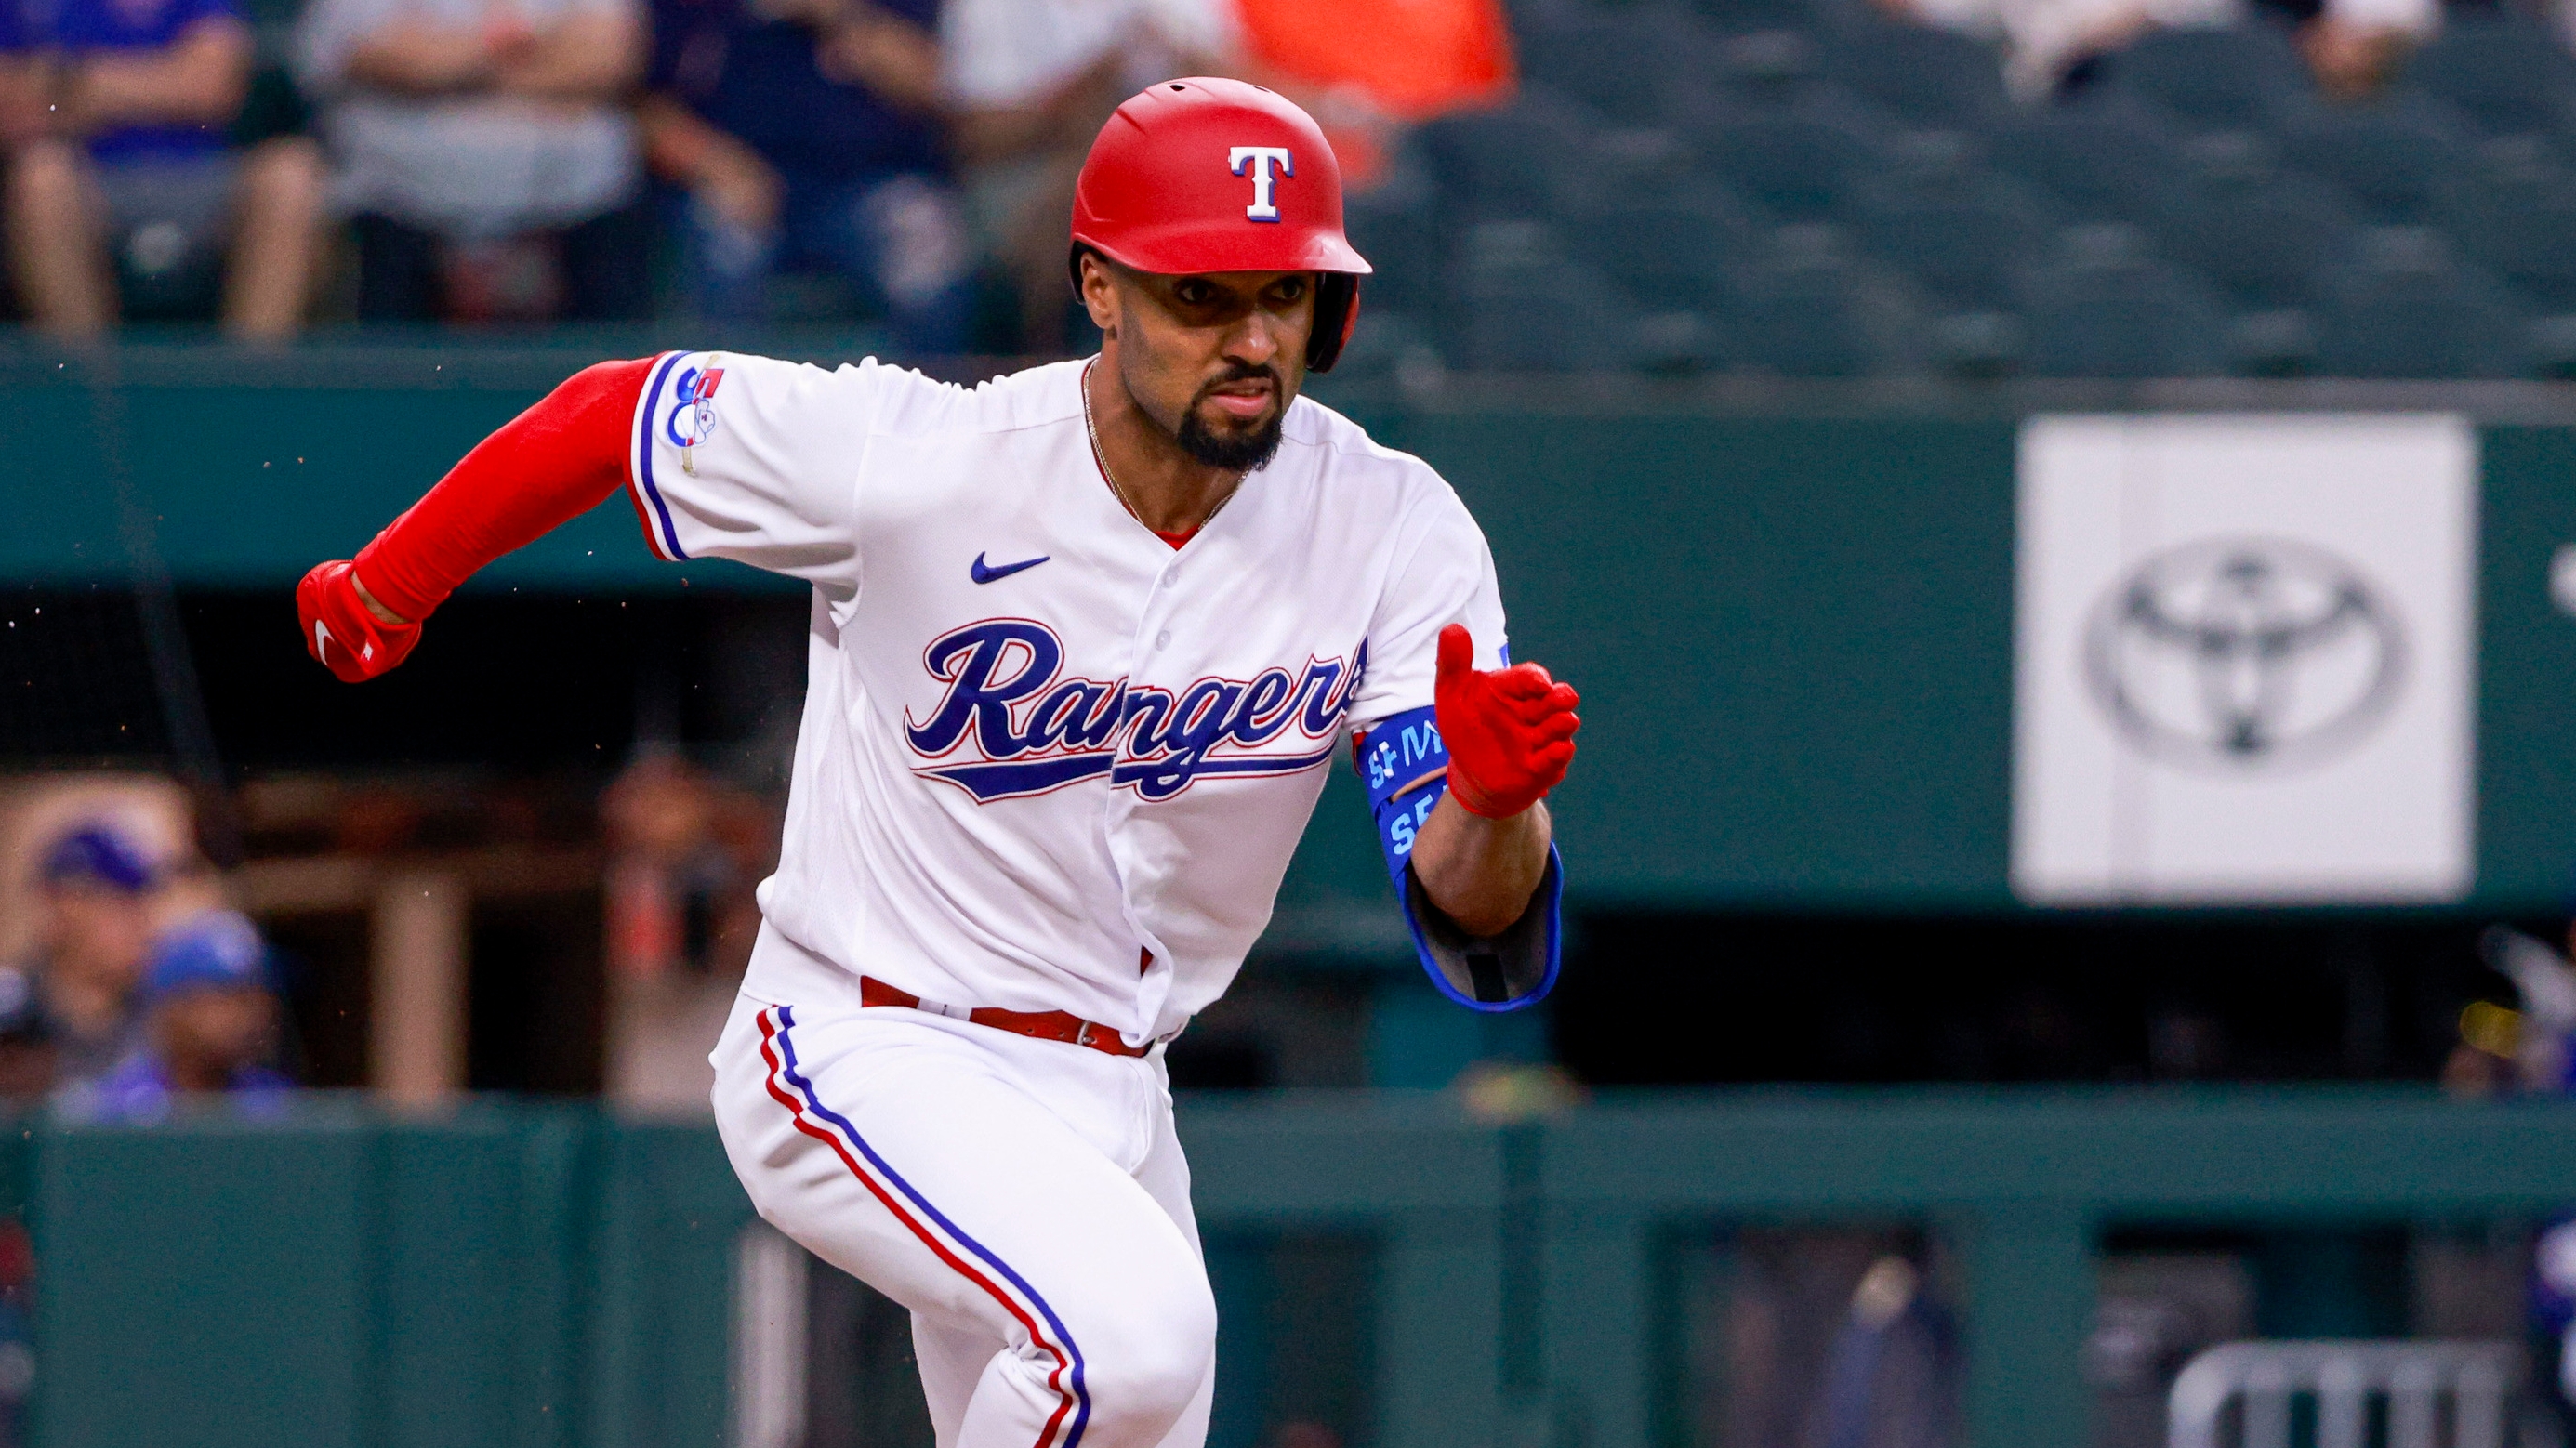 Rangers star Marcus Semien shares his tips on moving to D-FW for newcomers